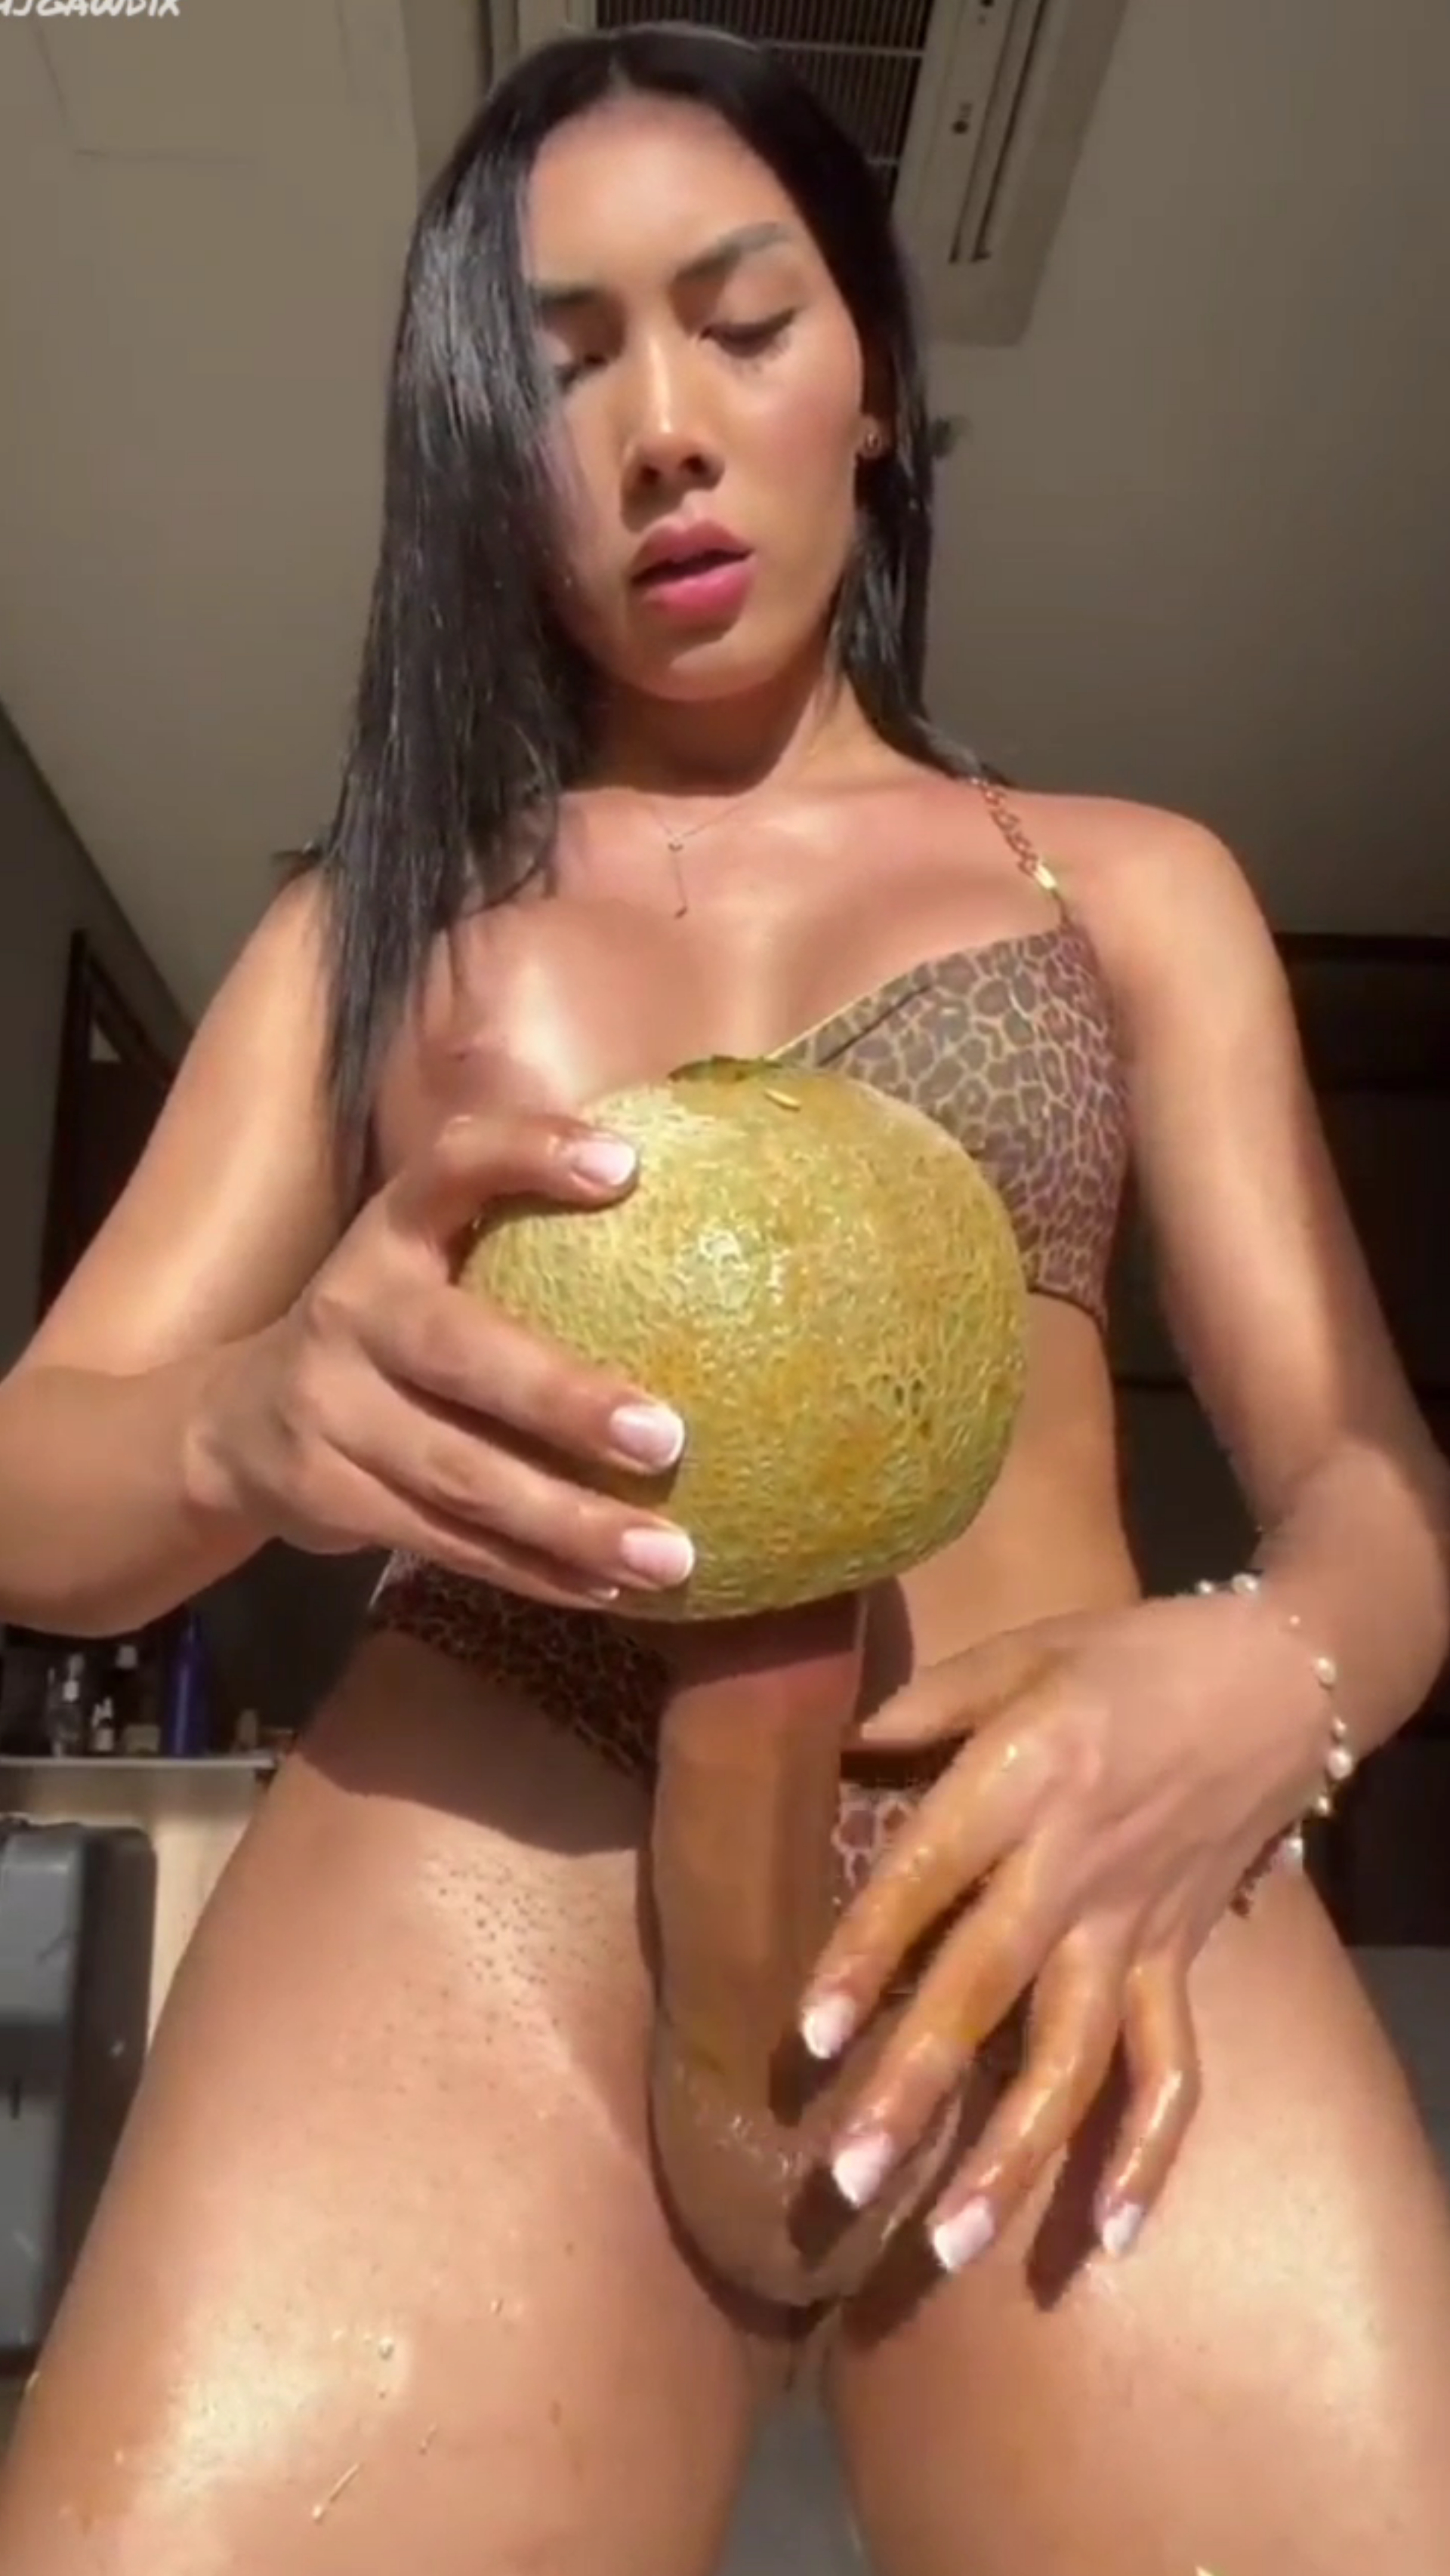 Sexy Shemale Oil - HOT ATTRACTIVE TS MODEL MASTURBATES WITH FRUITS - ThisVid.com